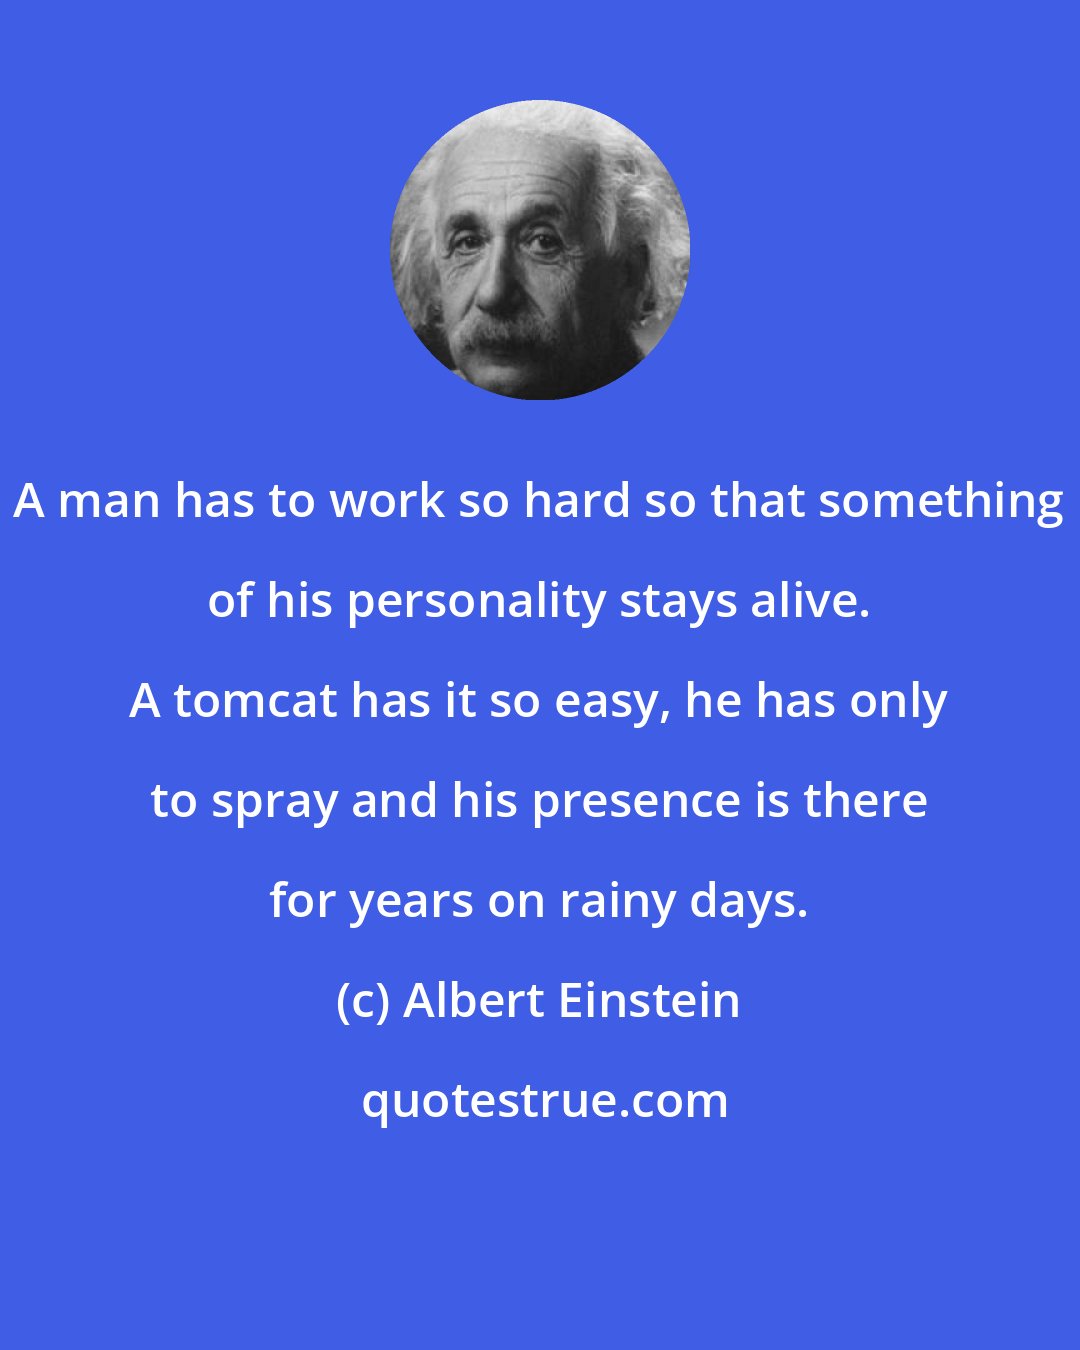 Albert Einstein: A man has to work so hard so that something of his personality stays alive. A tomcat has it so easy, he has only to spray and his presence is there for years on rainy days.